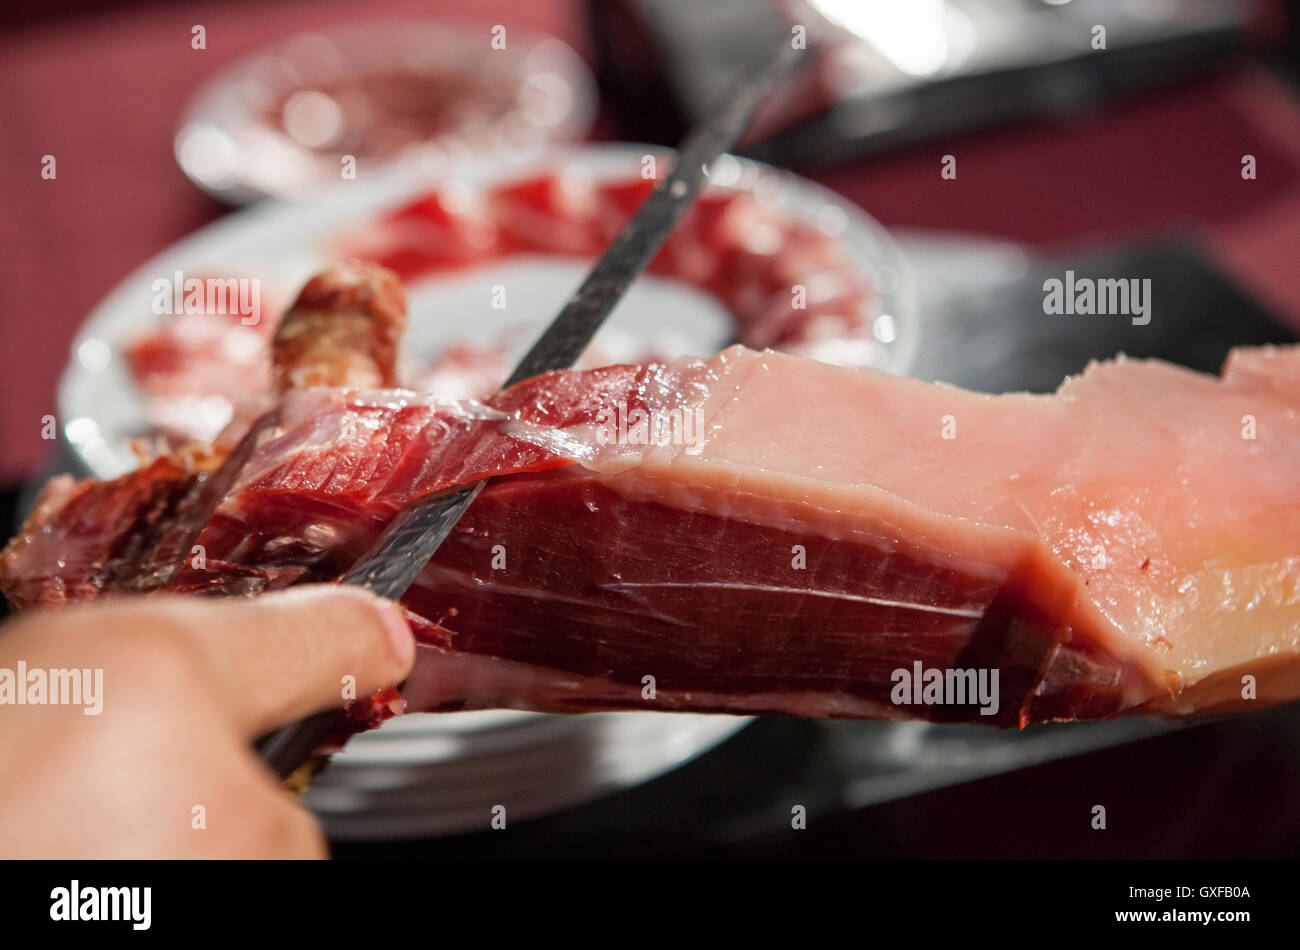 Master slicer cutting iberian cured ham. Selective focus point Stock Photo